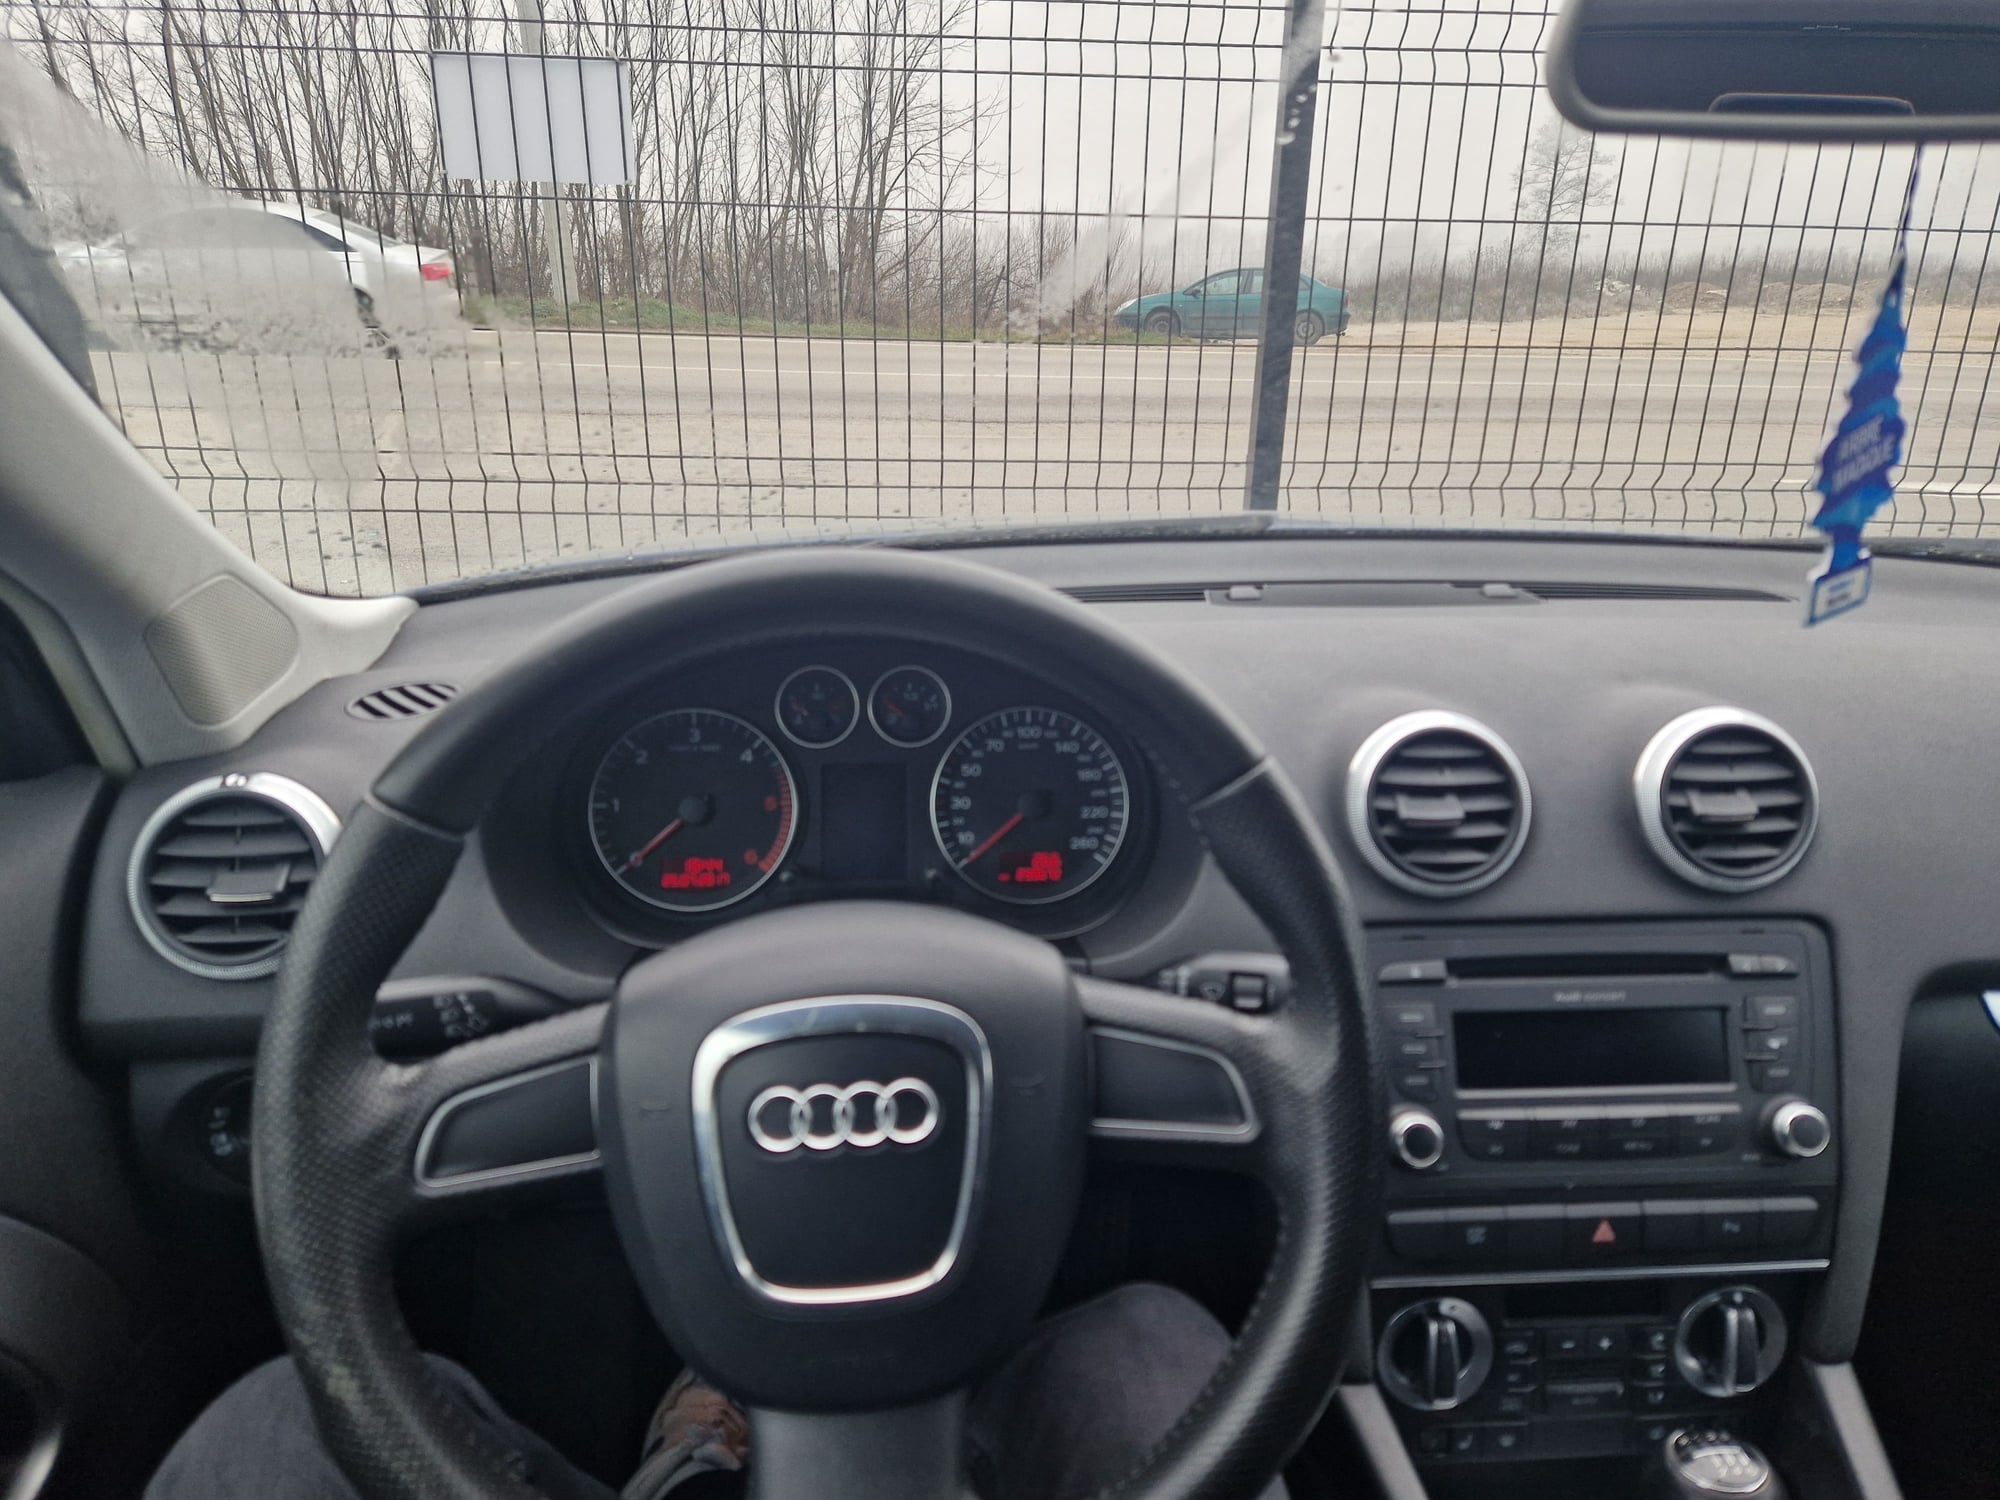 AUDI A3 8P - COMMON PROBLEMS *BUYERS GUIDE * 